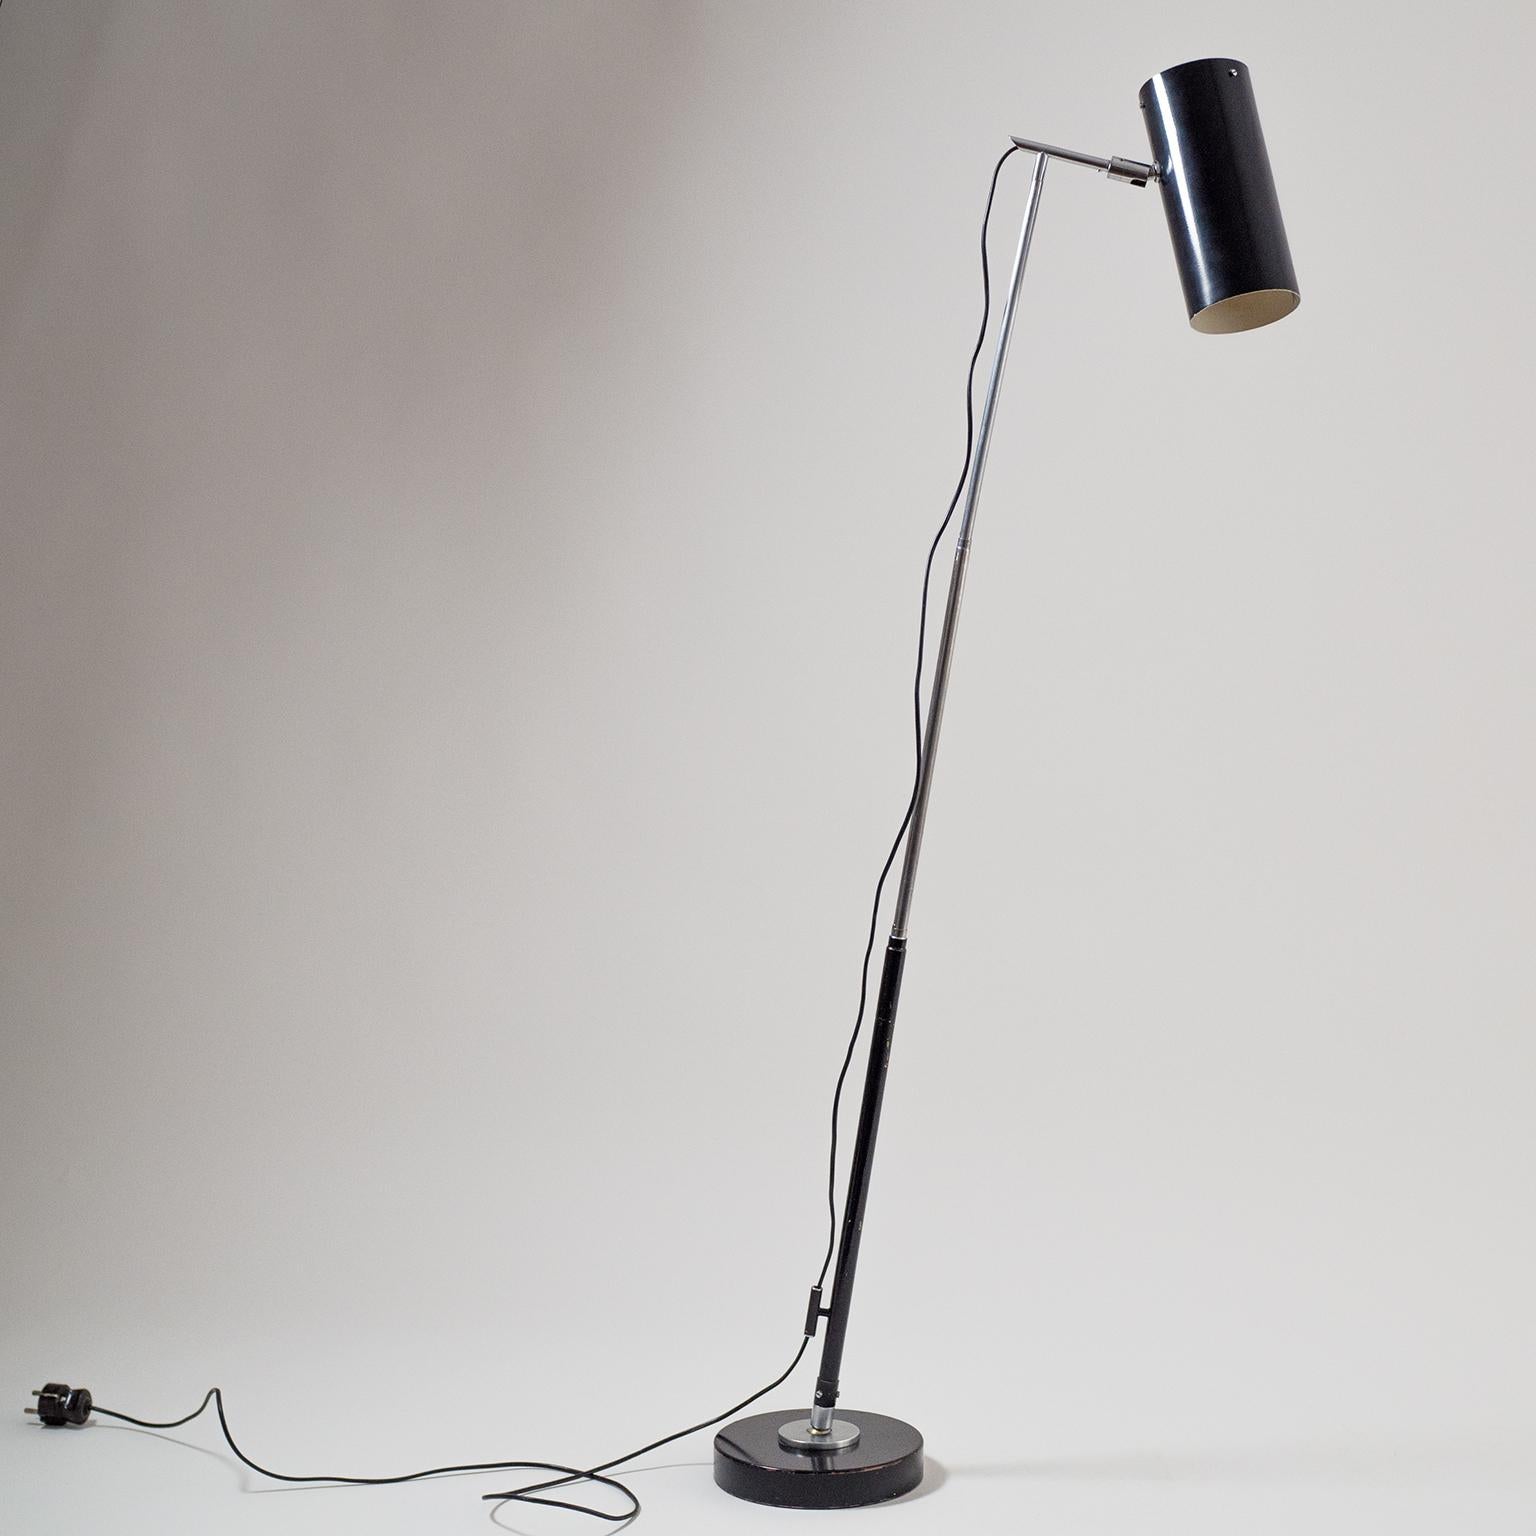 Mid-Century Modern O'Luce 201 Telescopic Floor Lamp by Ostuni and Forti, circa 1950